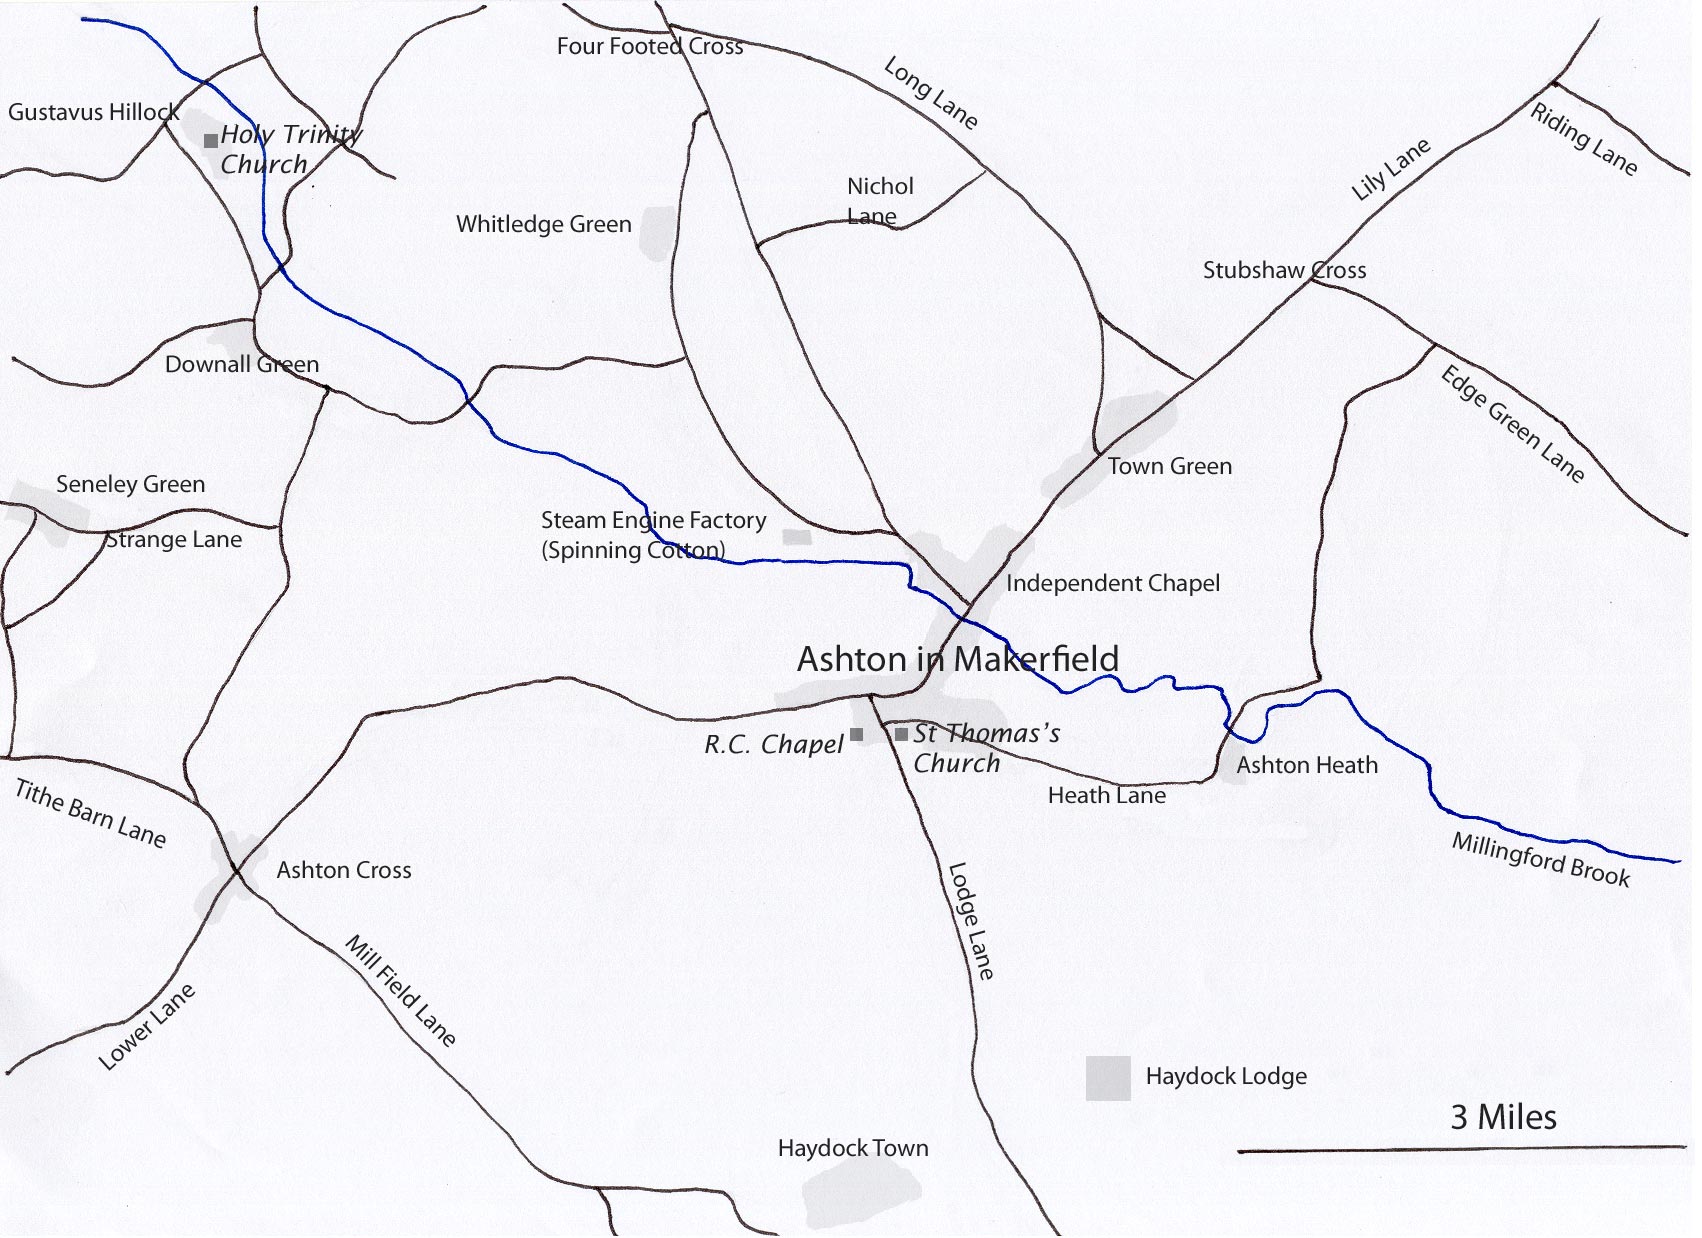 A sketch map, drawn by Alison Wearing, of the area around the town of Ashton in Makerfield. The map is based on the Ordinance Survey Map Epoch 1 Lancashire Tile No 101 circa 1845